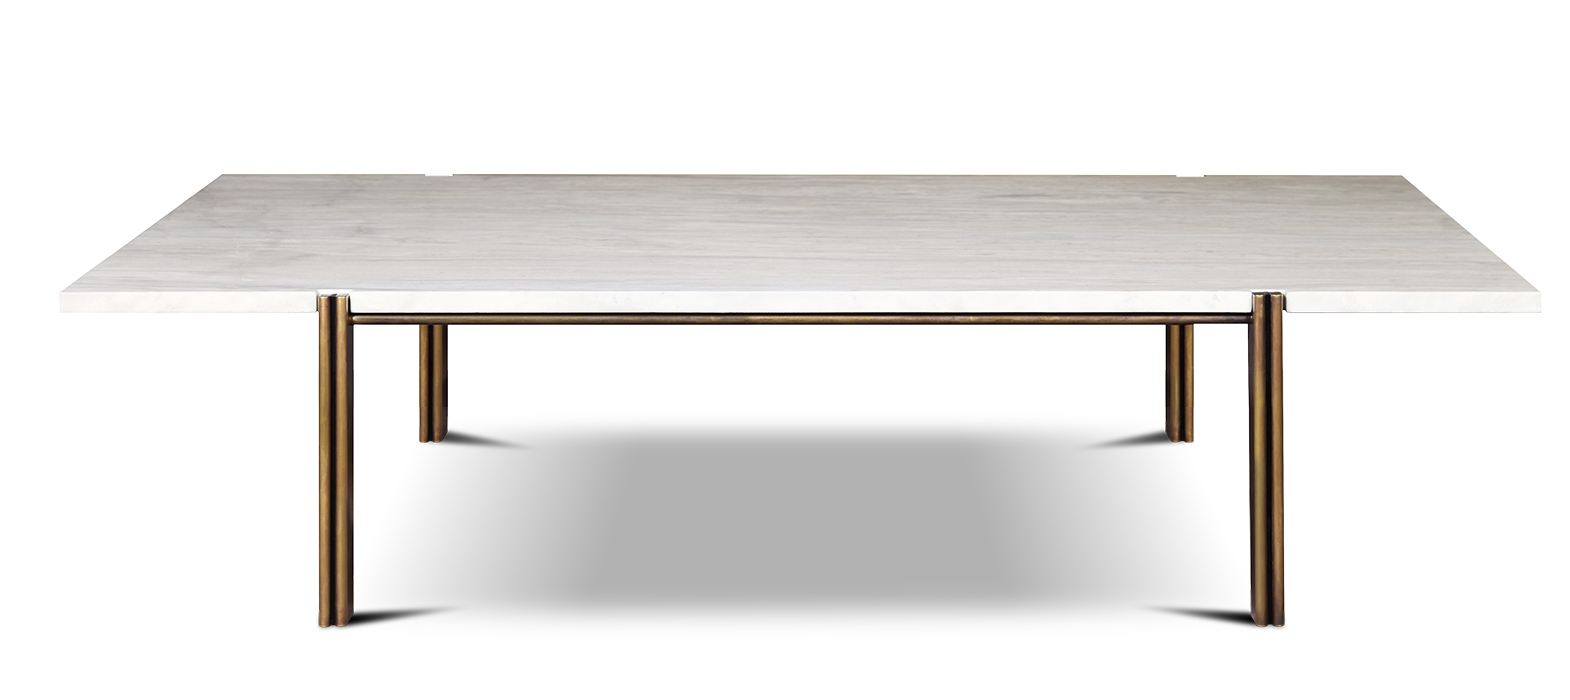 LAGHI COCKTAIL TABLE 150 X 100